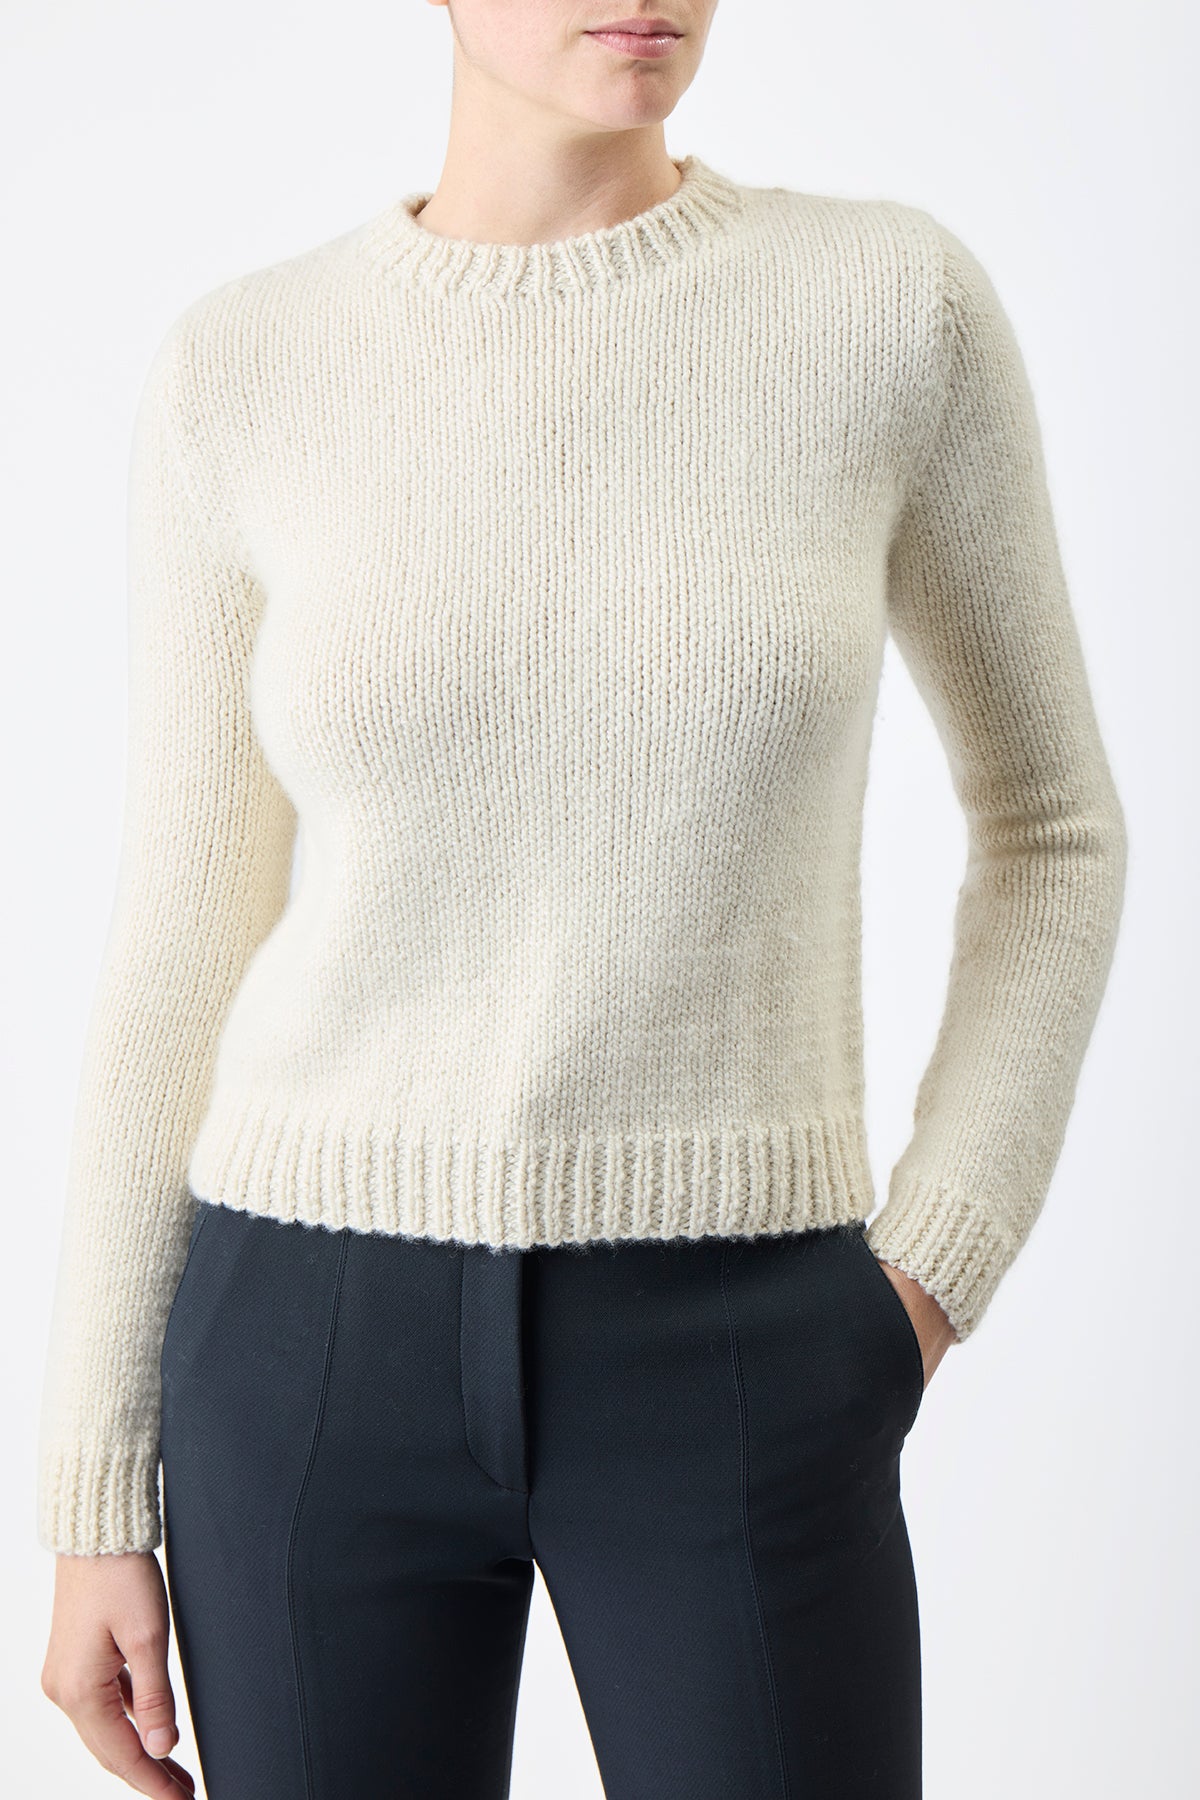 Rhun Knit Sweater in Ivory Dense Cashmere